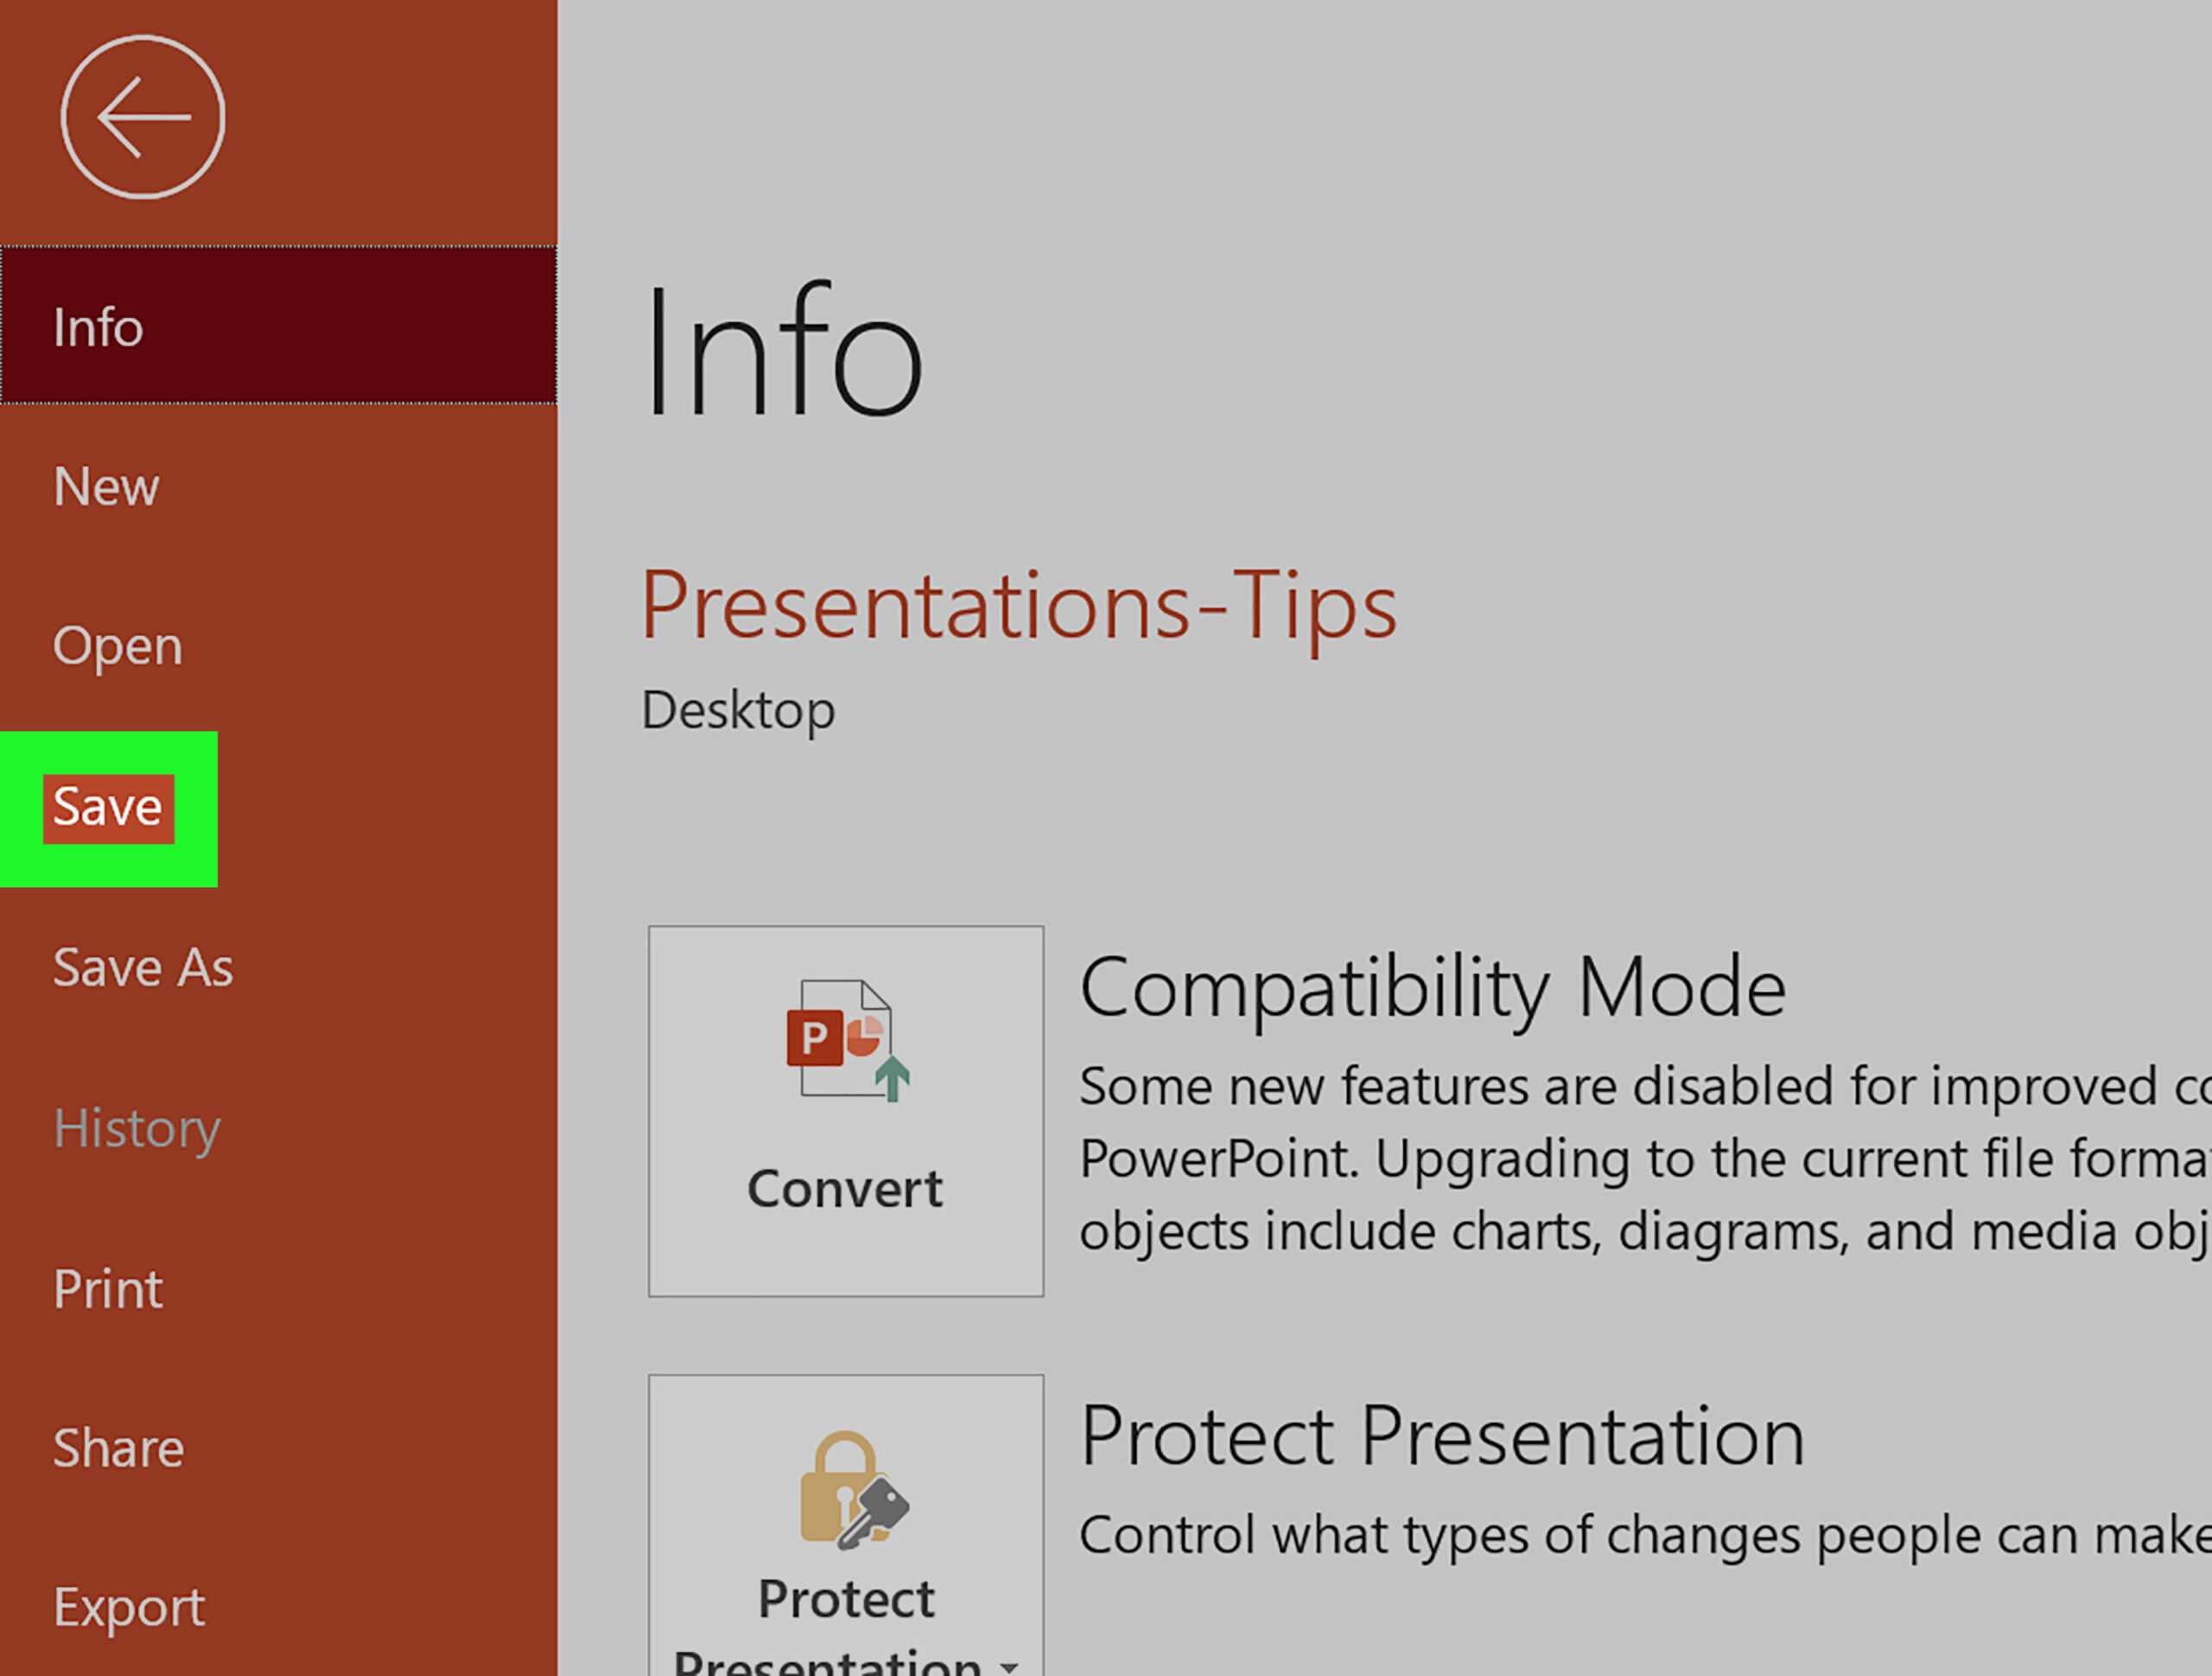 How To Edit A Powerpoint Template: 6 Steps (With Pictures) Intended For How To Edit Powerpoint Template